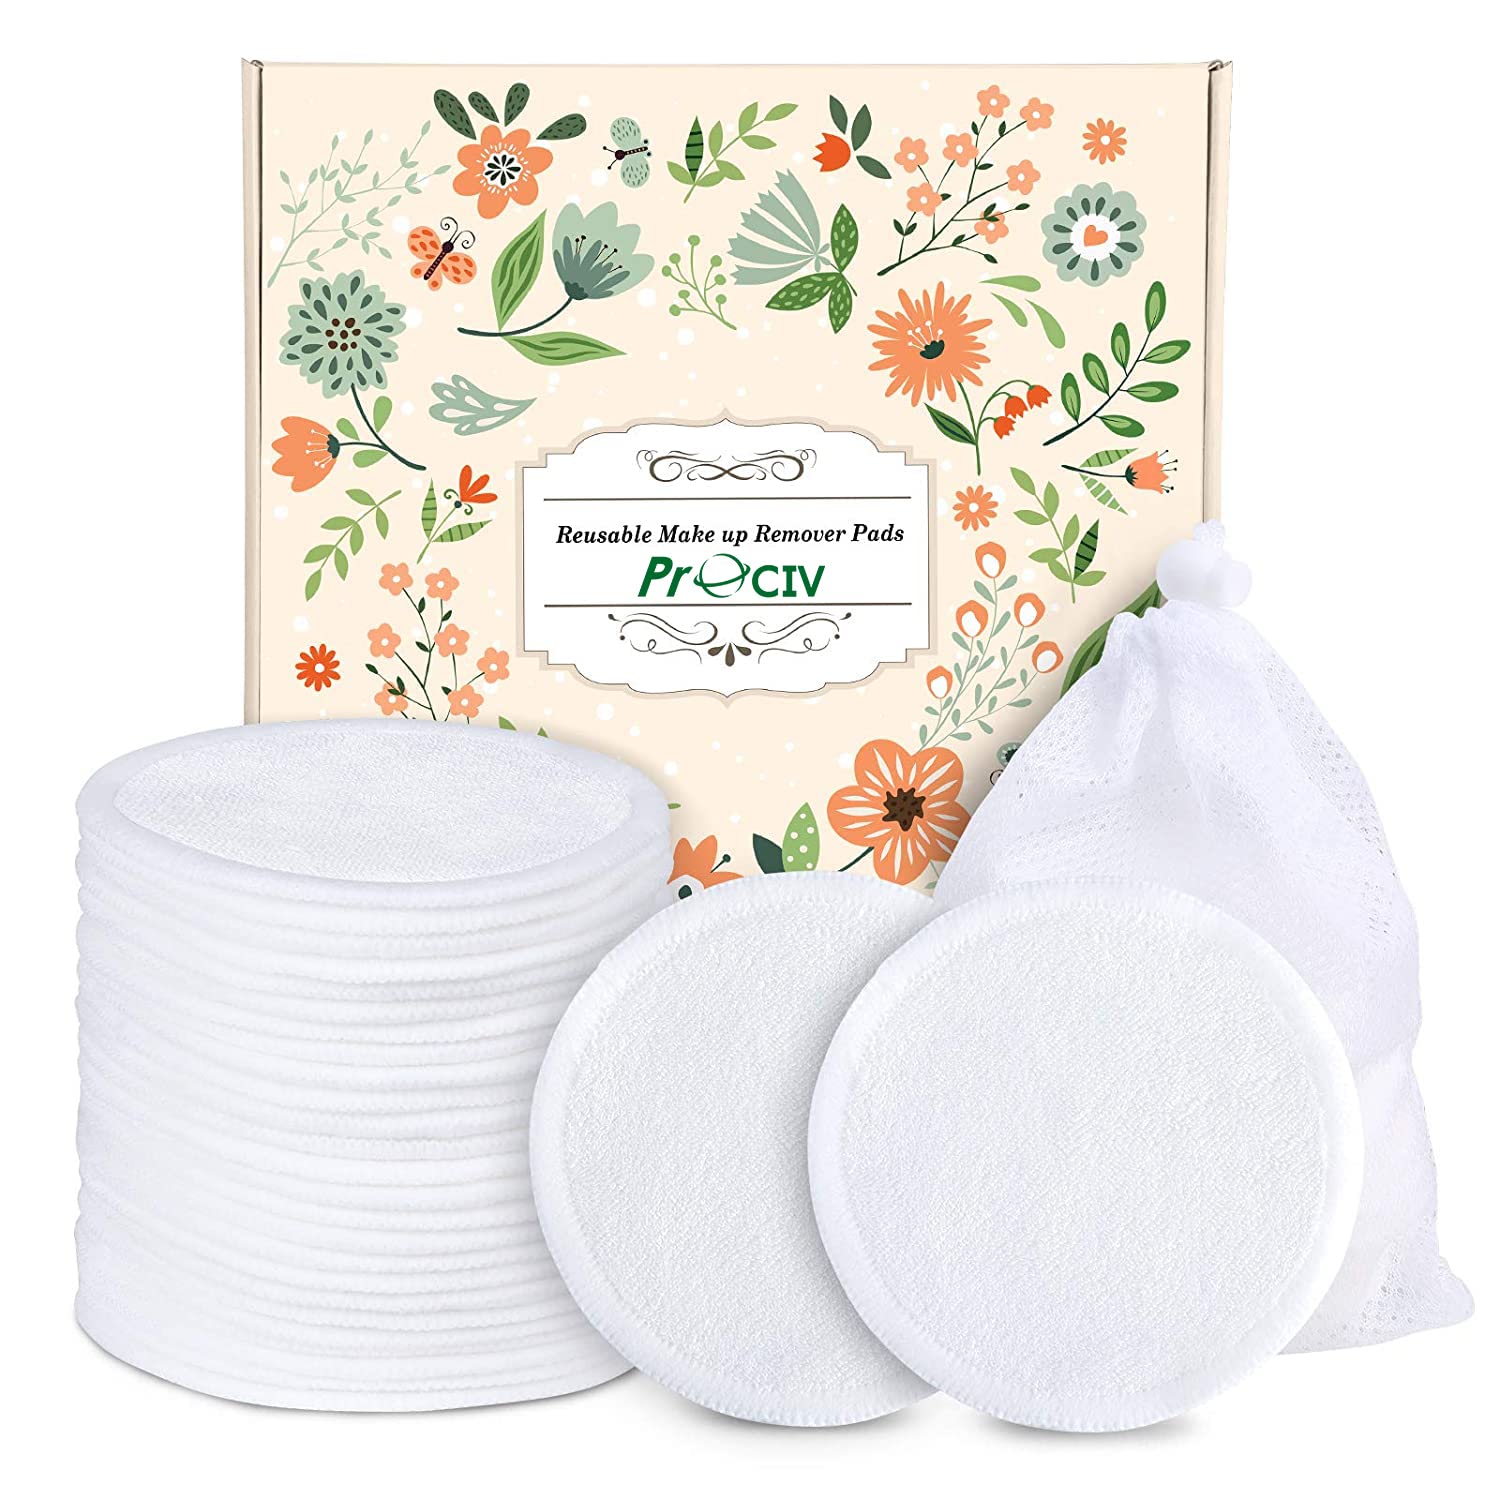 ProCIV Reusable Makeup Remover Pads, 18 Packs Washable Organic Bamboo Reusable Cotton Rounds for All Skin Types & Toner with Laundry Bag, Eco Friendly Zero Waste Reusable Cotton Pads for Woman (White)